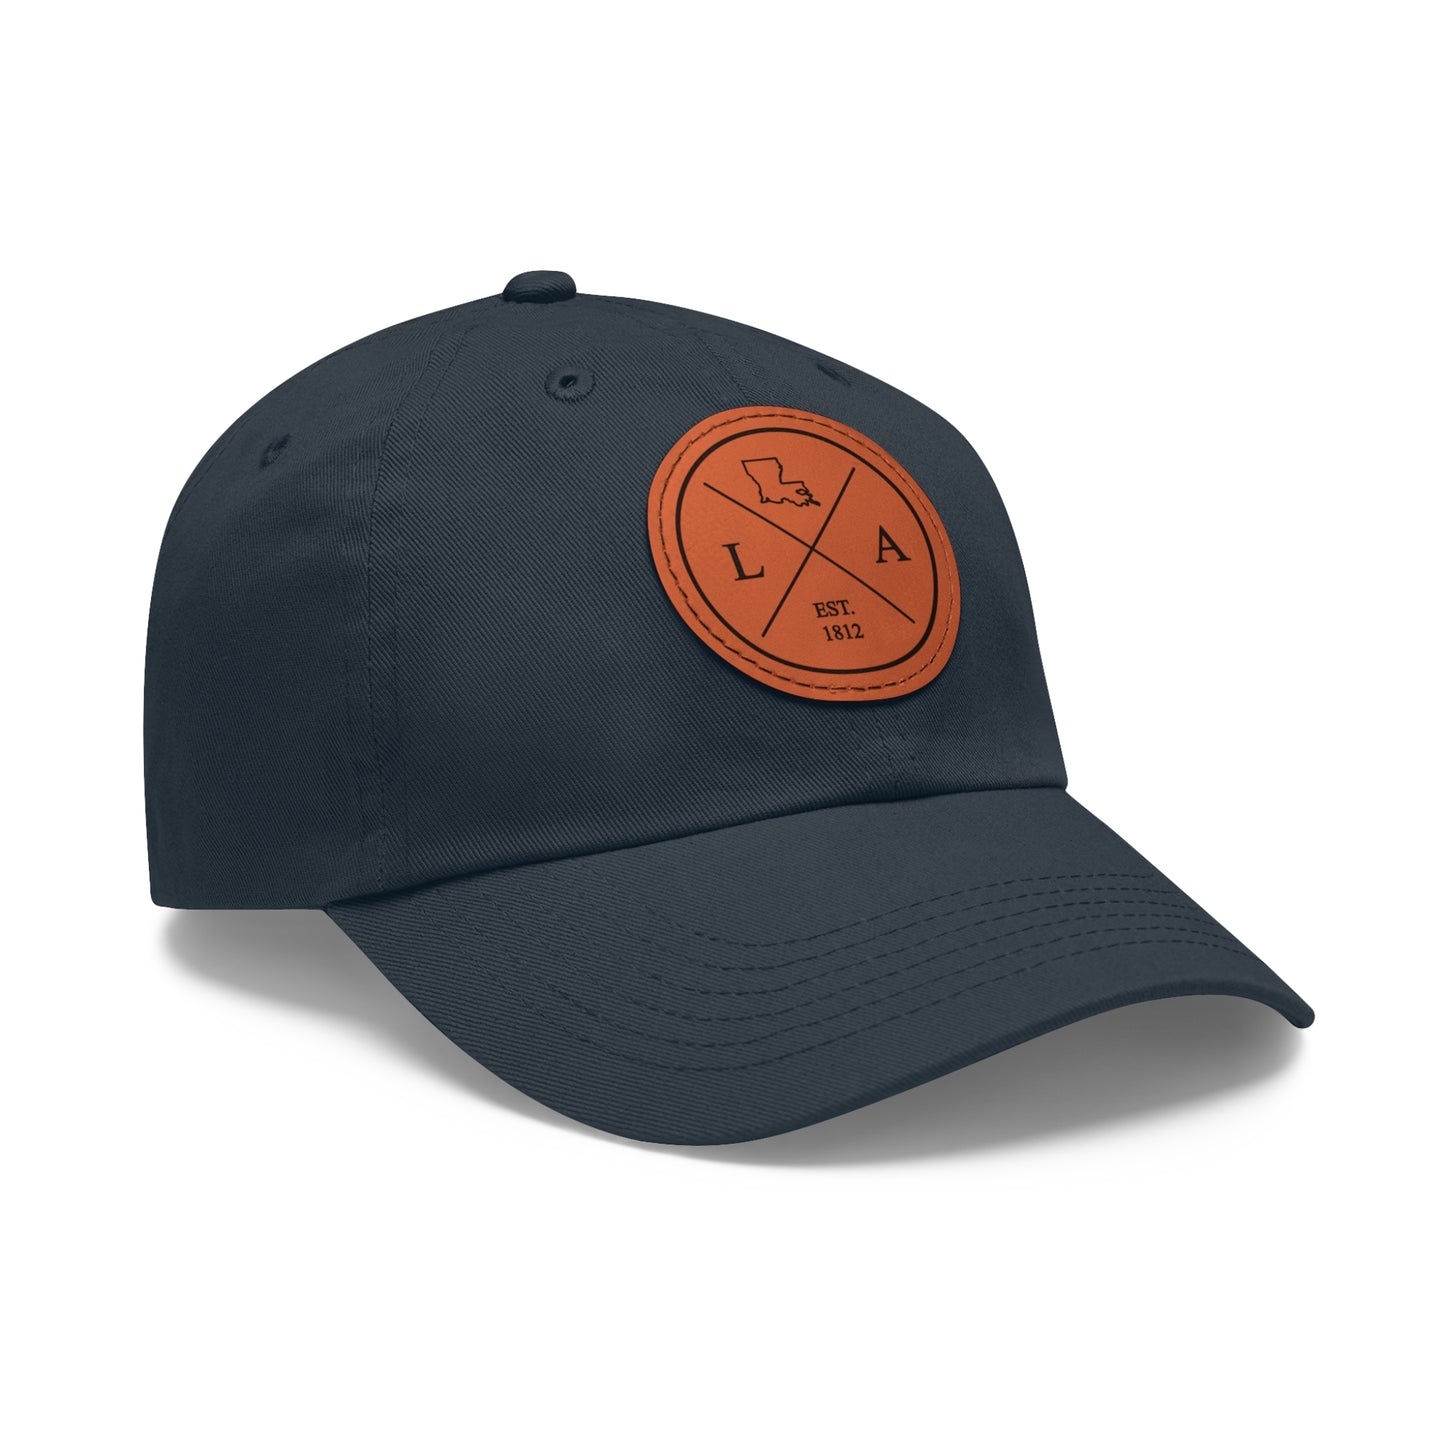 Louisiana Dad Hat with Leather Patch